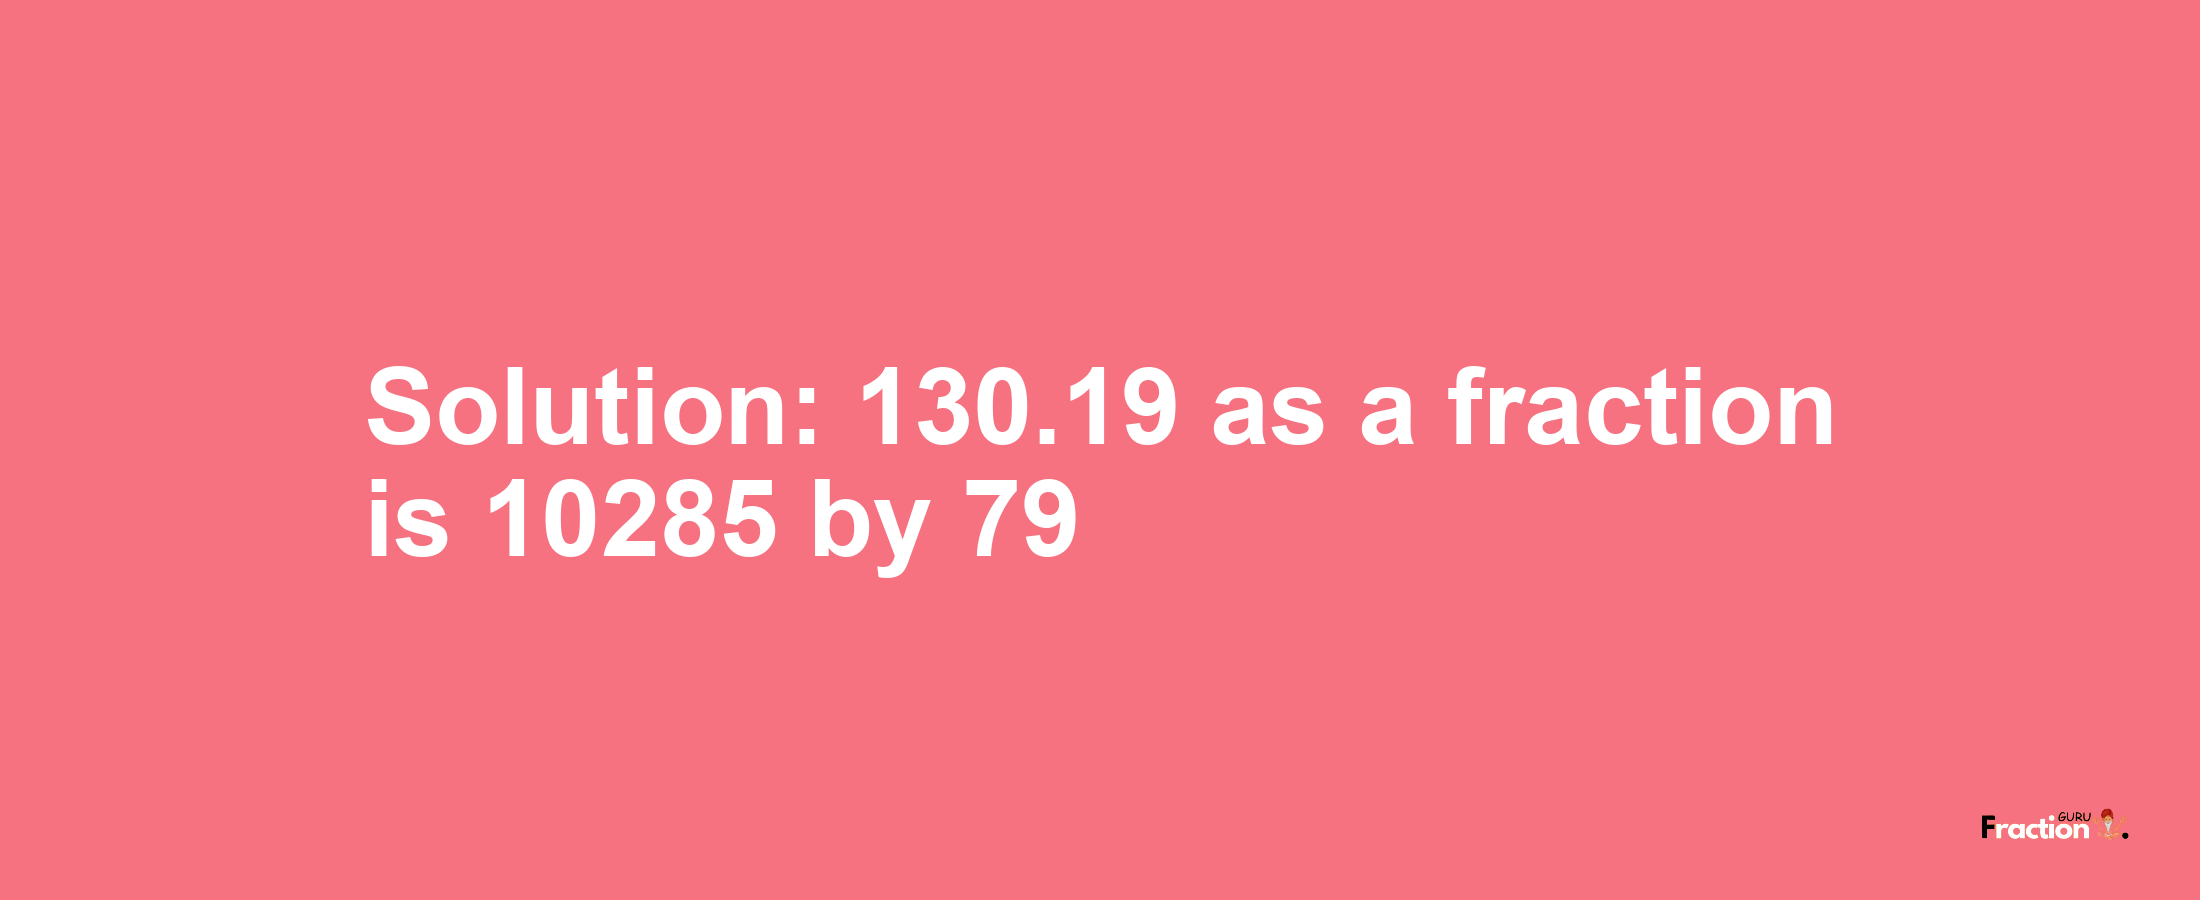 Solution:130.19 as a fraction is 10285/79